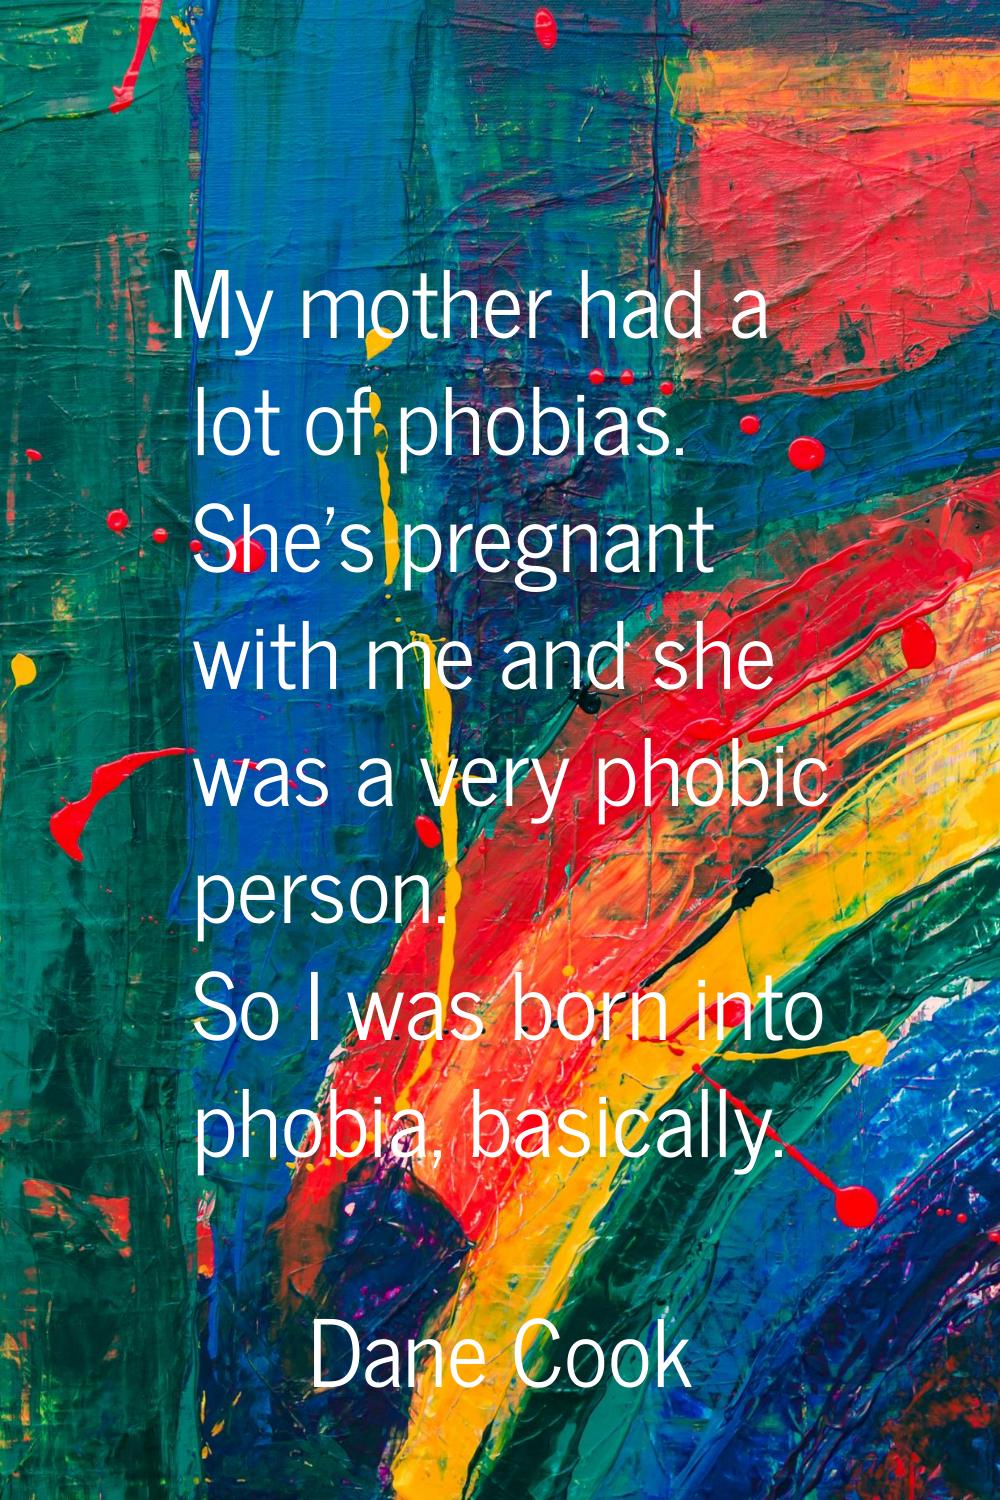 My mother had a lot of phobias. She's pregnant with me and she was a very phobic person. So I was b